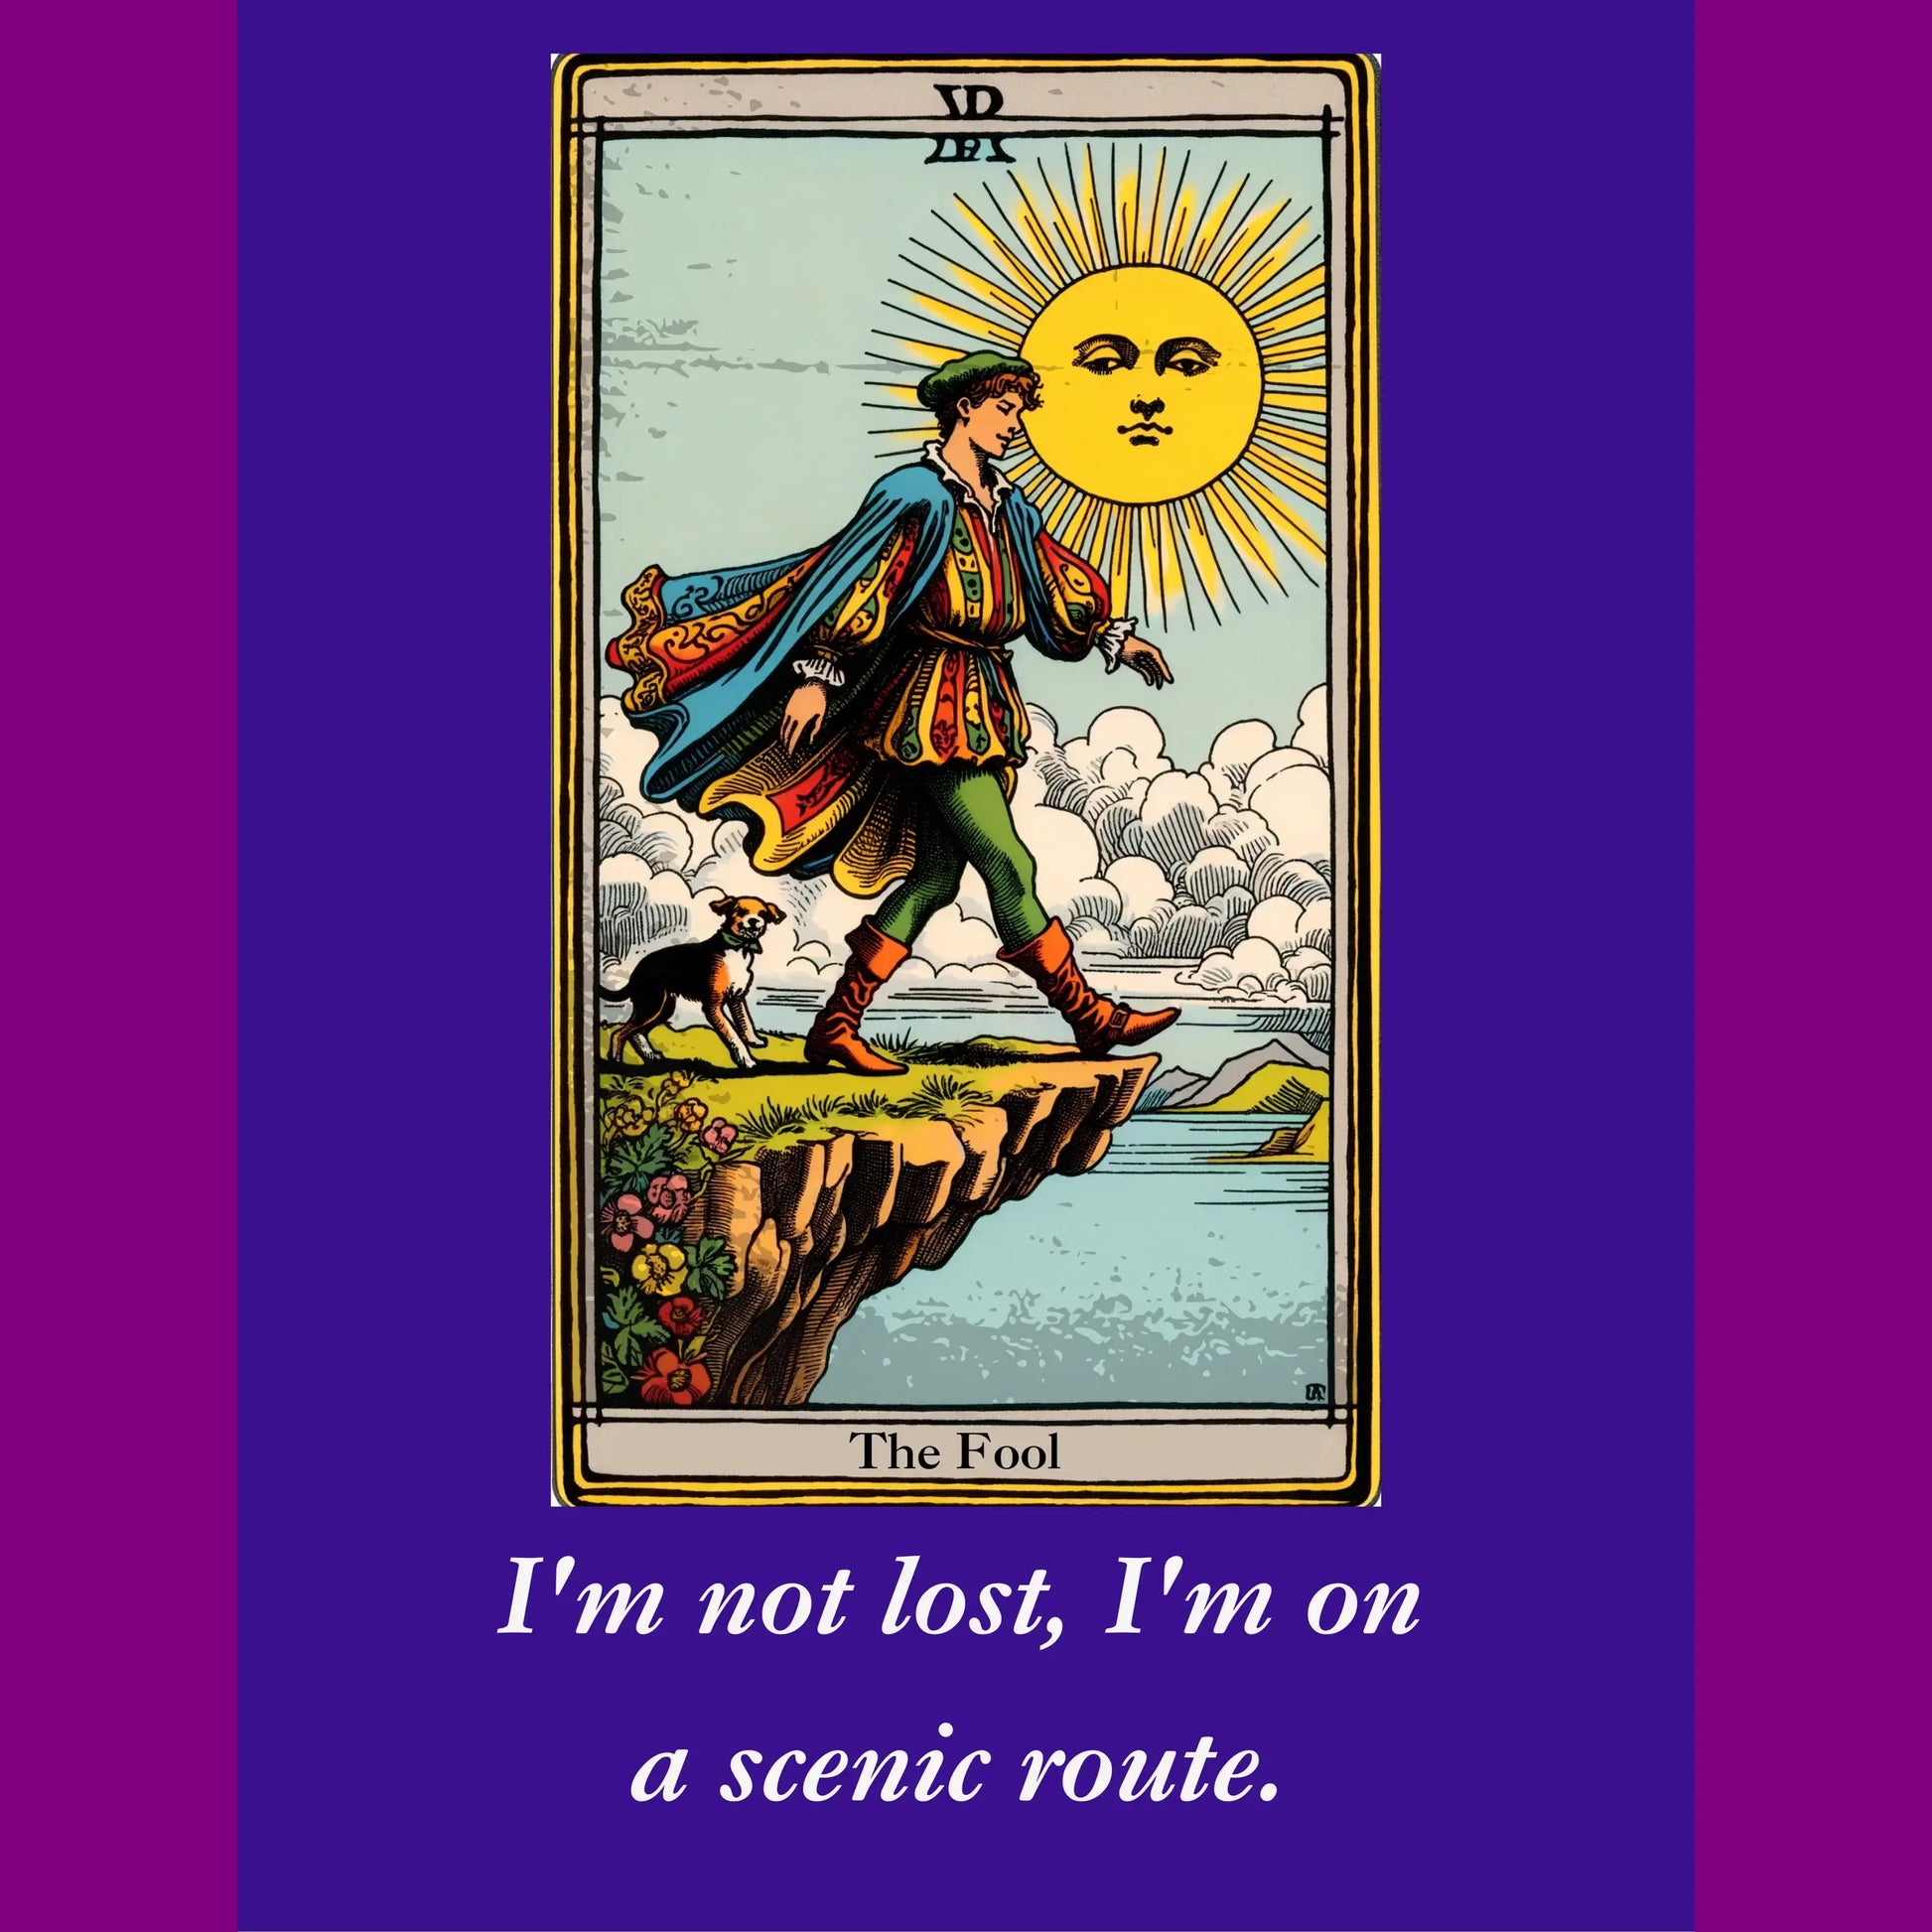 I'm not lost. I'm on a scenic route. Funny, the fool. Tarot card design from Blk Moon shop.